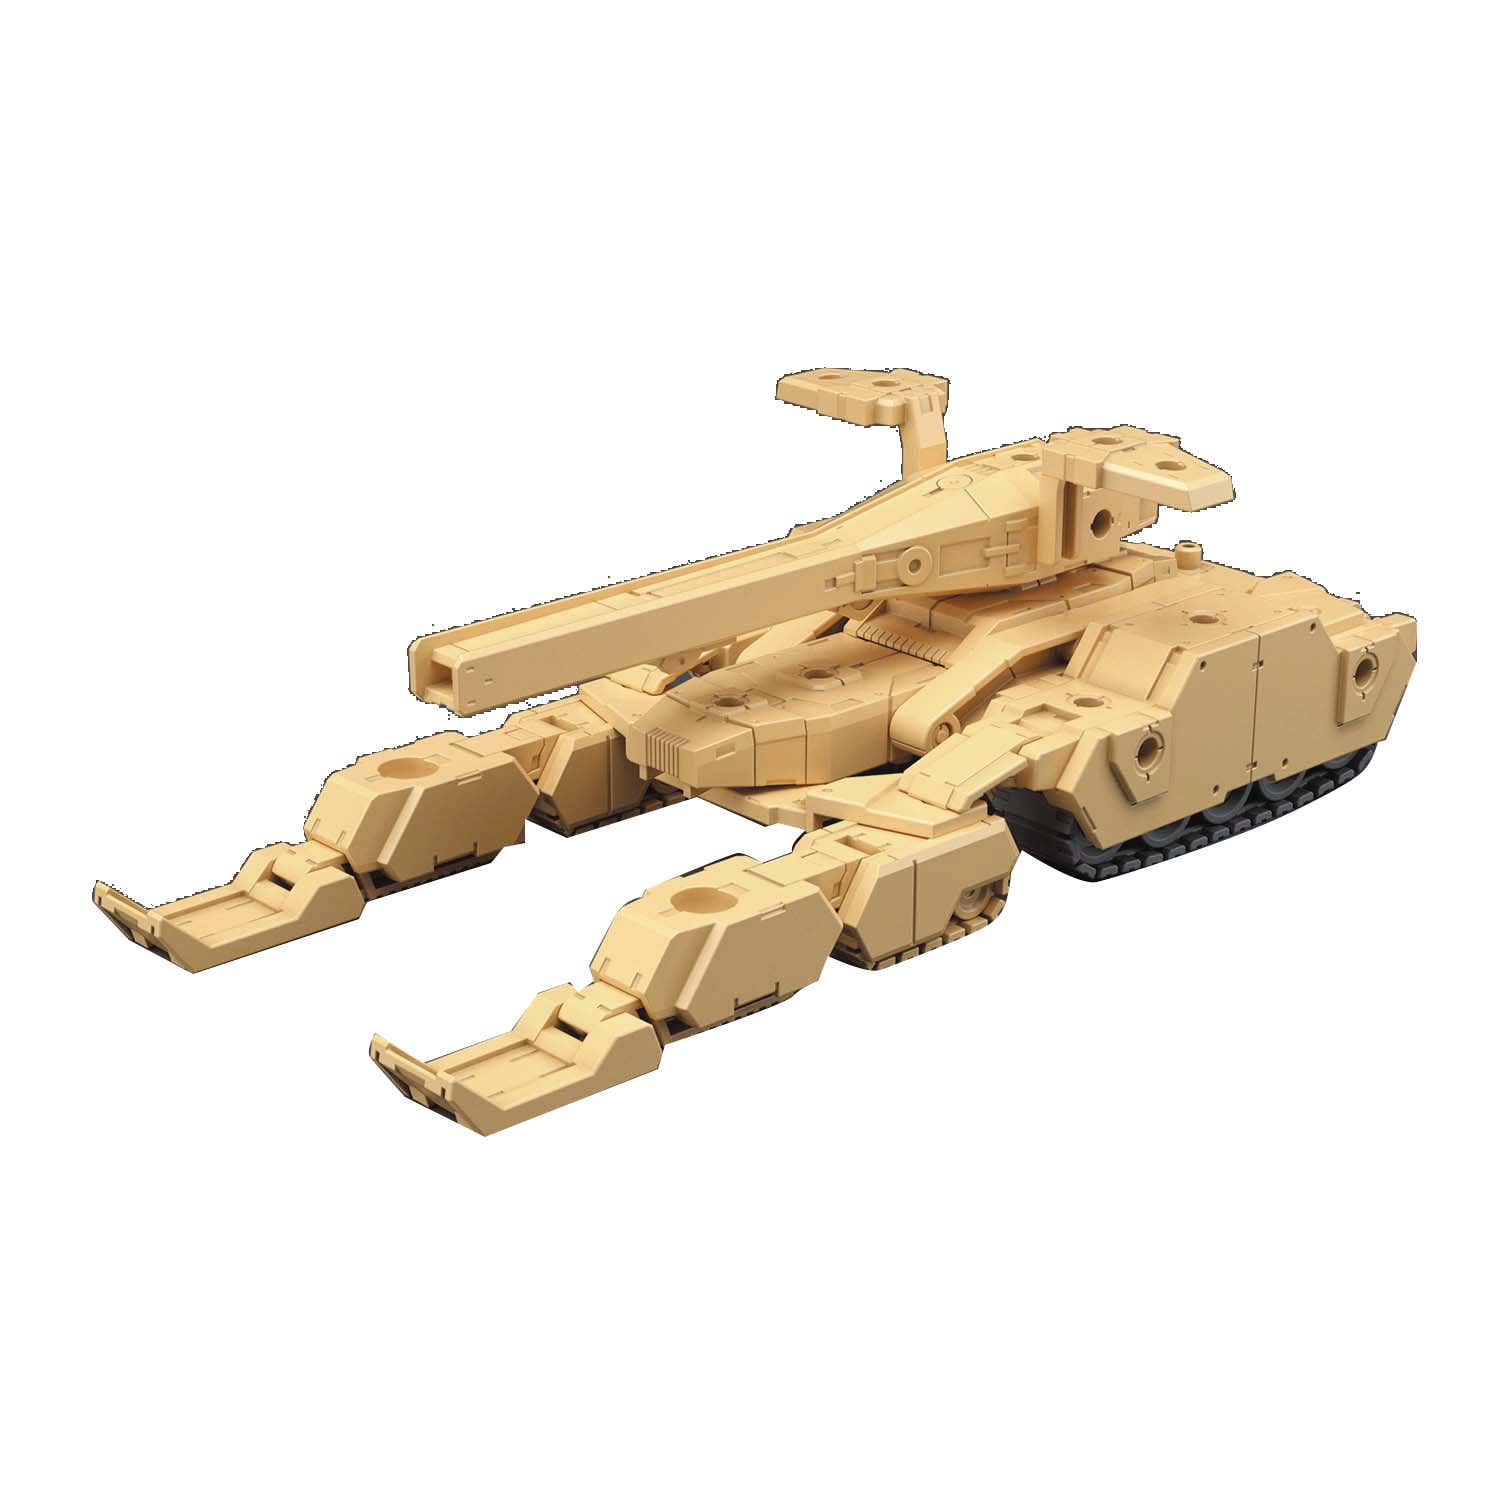 30MM Extended Armament Vehicle Tank - Brown